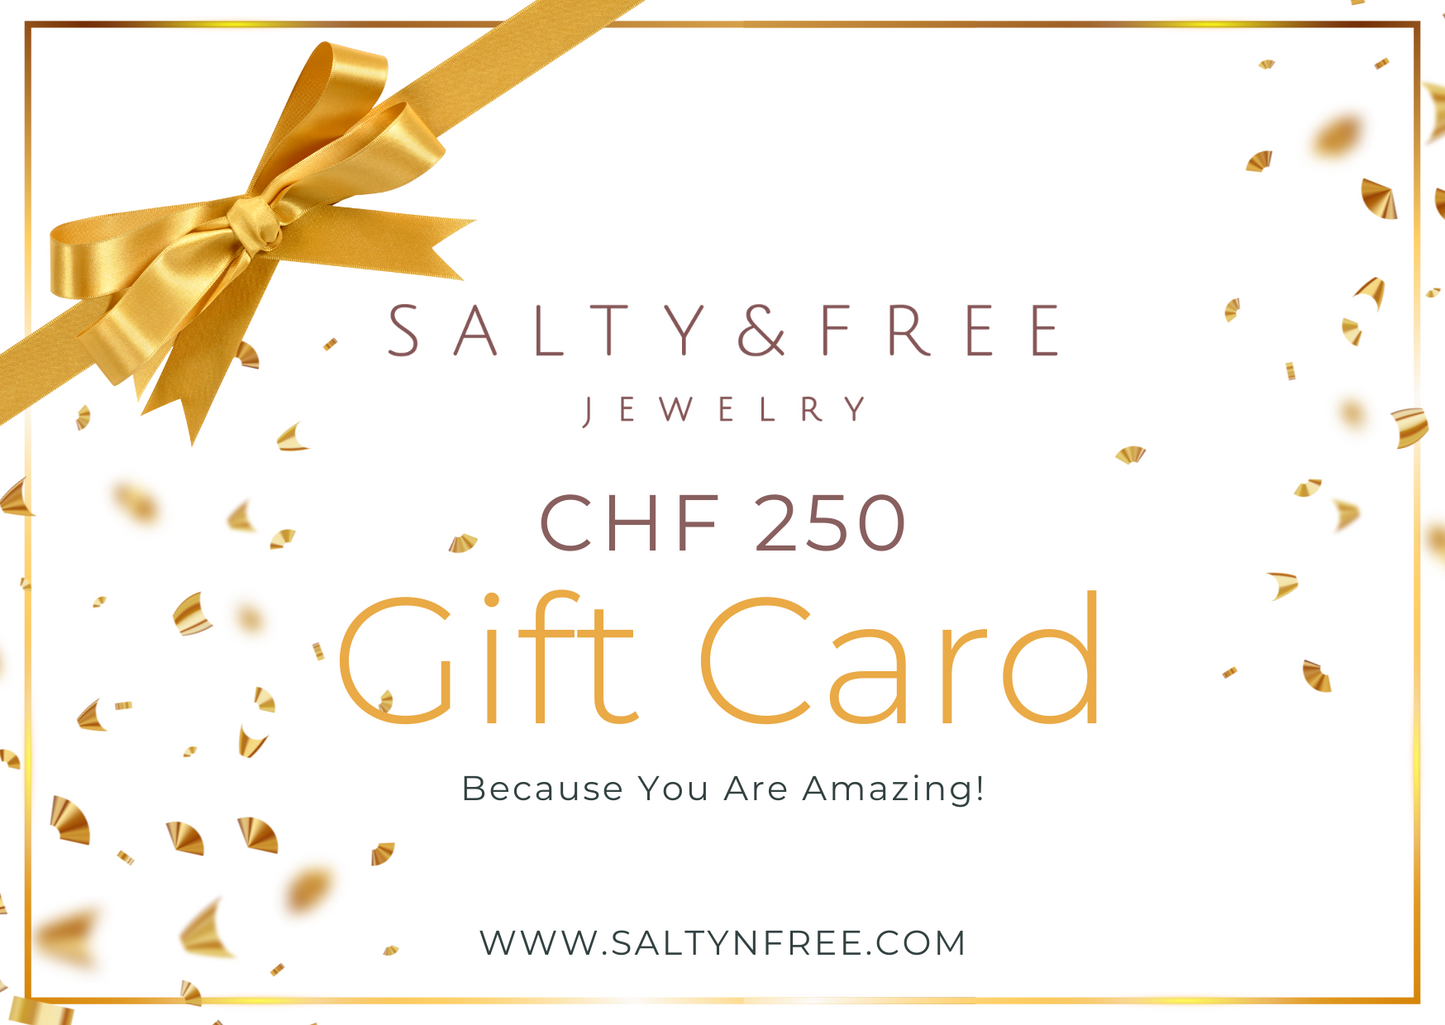 Salty & Free Gift Card "Because You Are Amazing!"